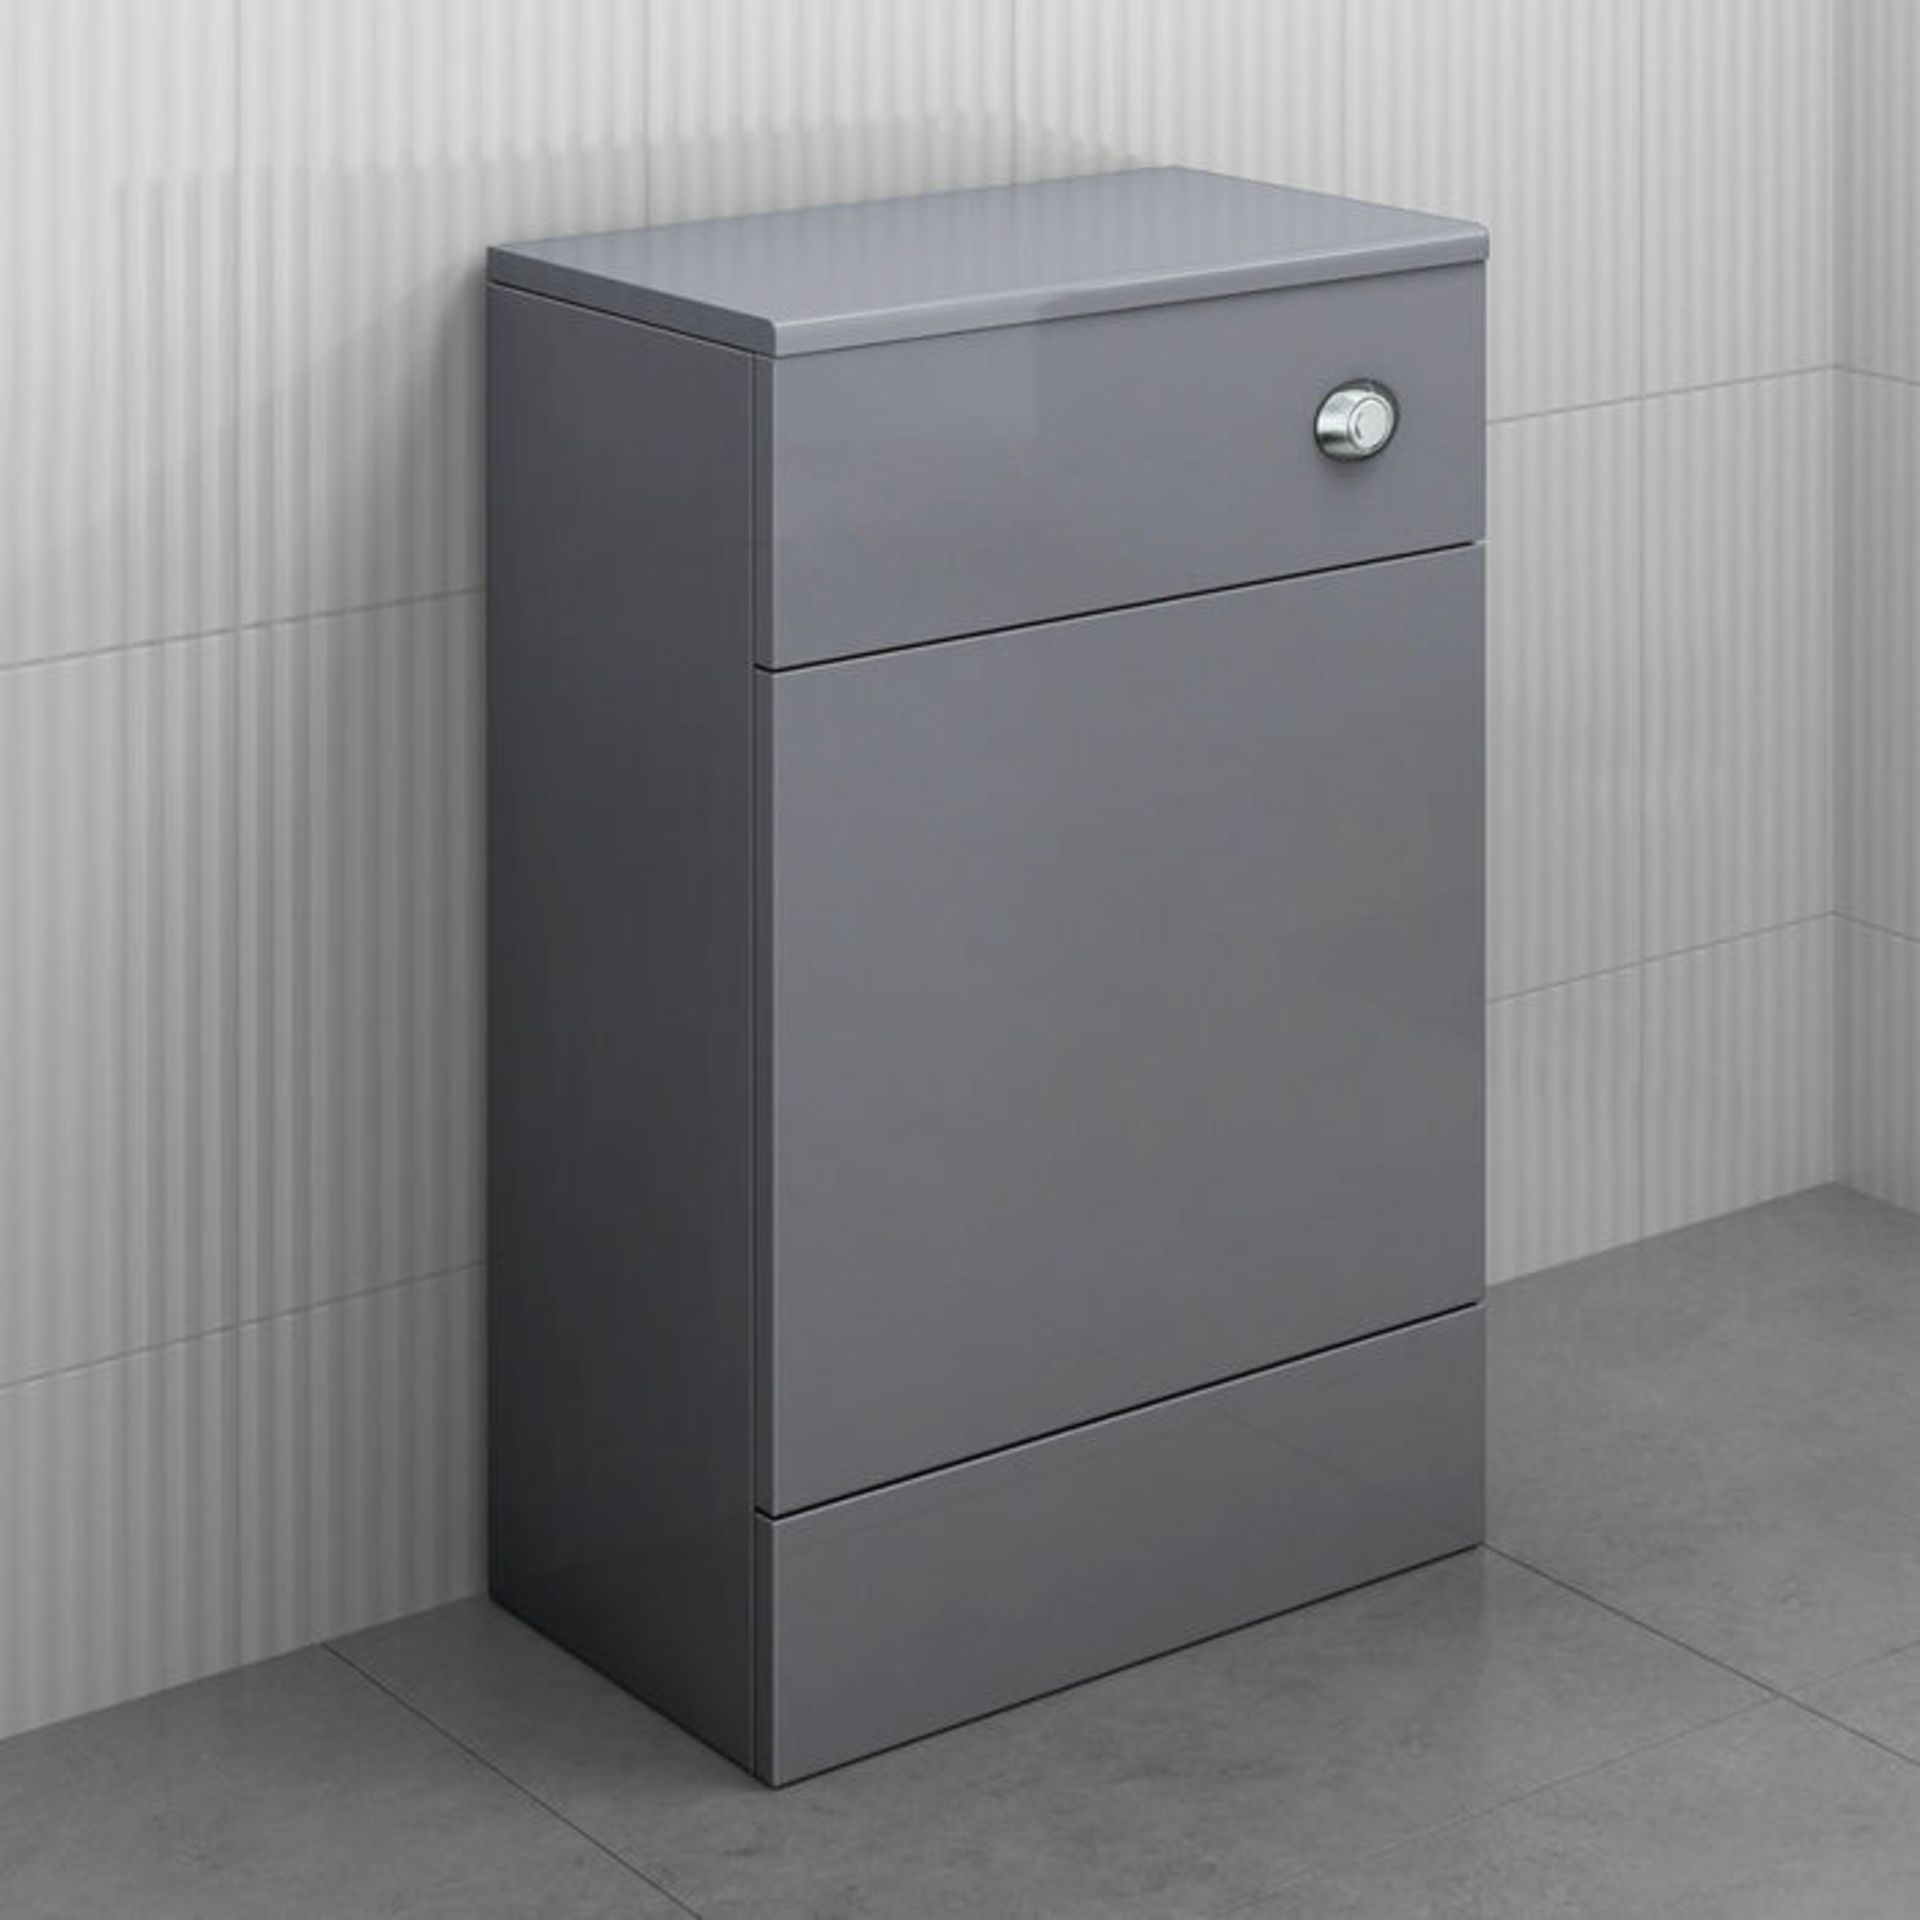 (YC22) 500mm Harper Gloss Grey Back To Wall Toilet Unit. RRP £119.99. Our discreet unit cleverly